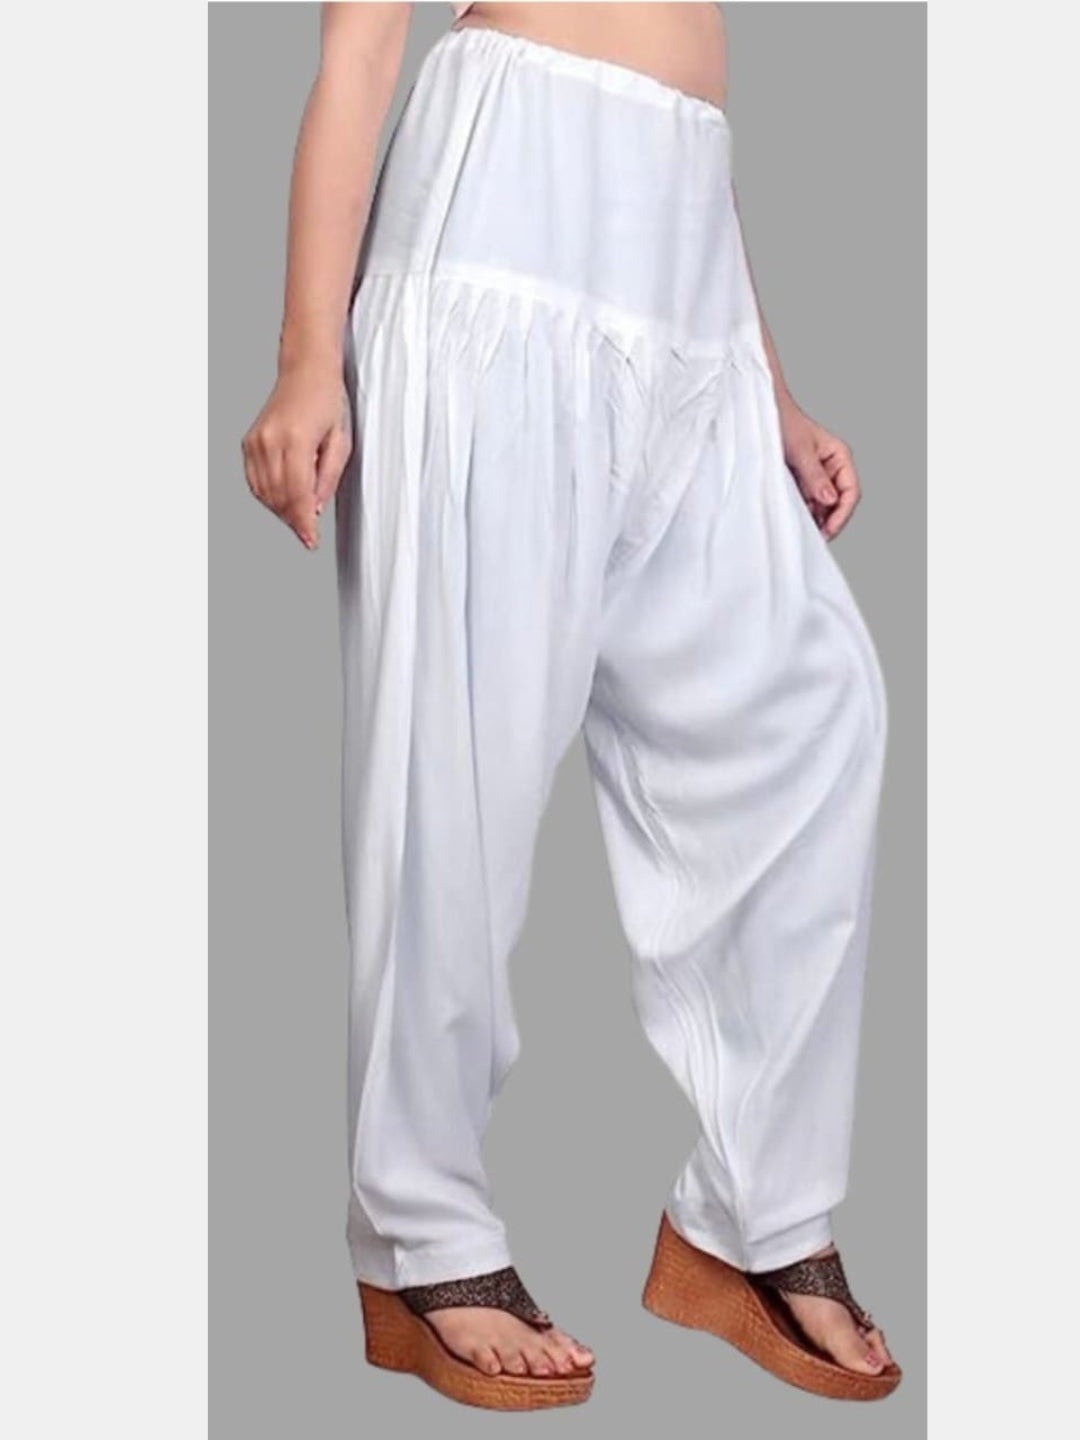 Rani Pink - Pure Cotton Solid Color Patiala Pants for women